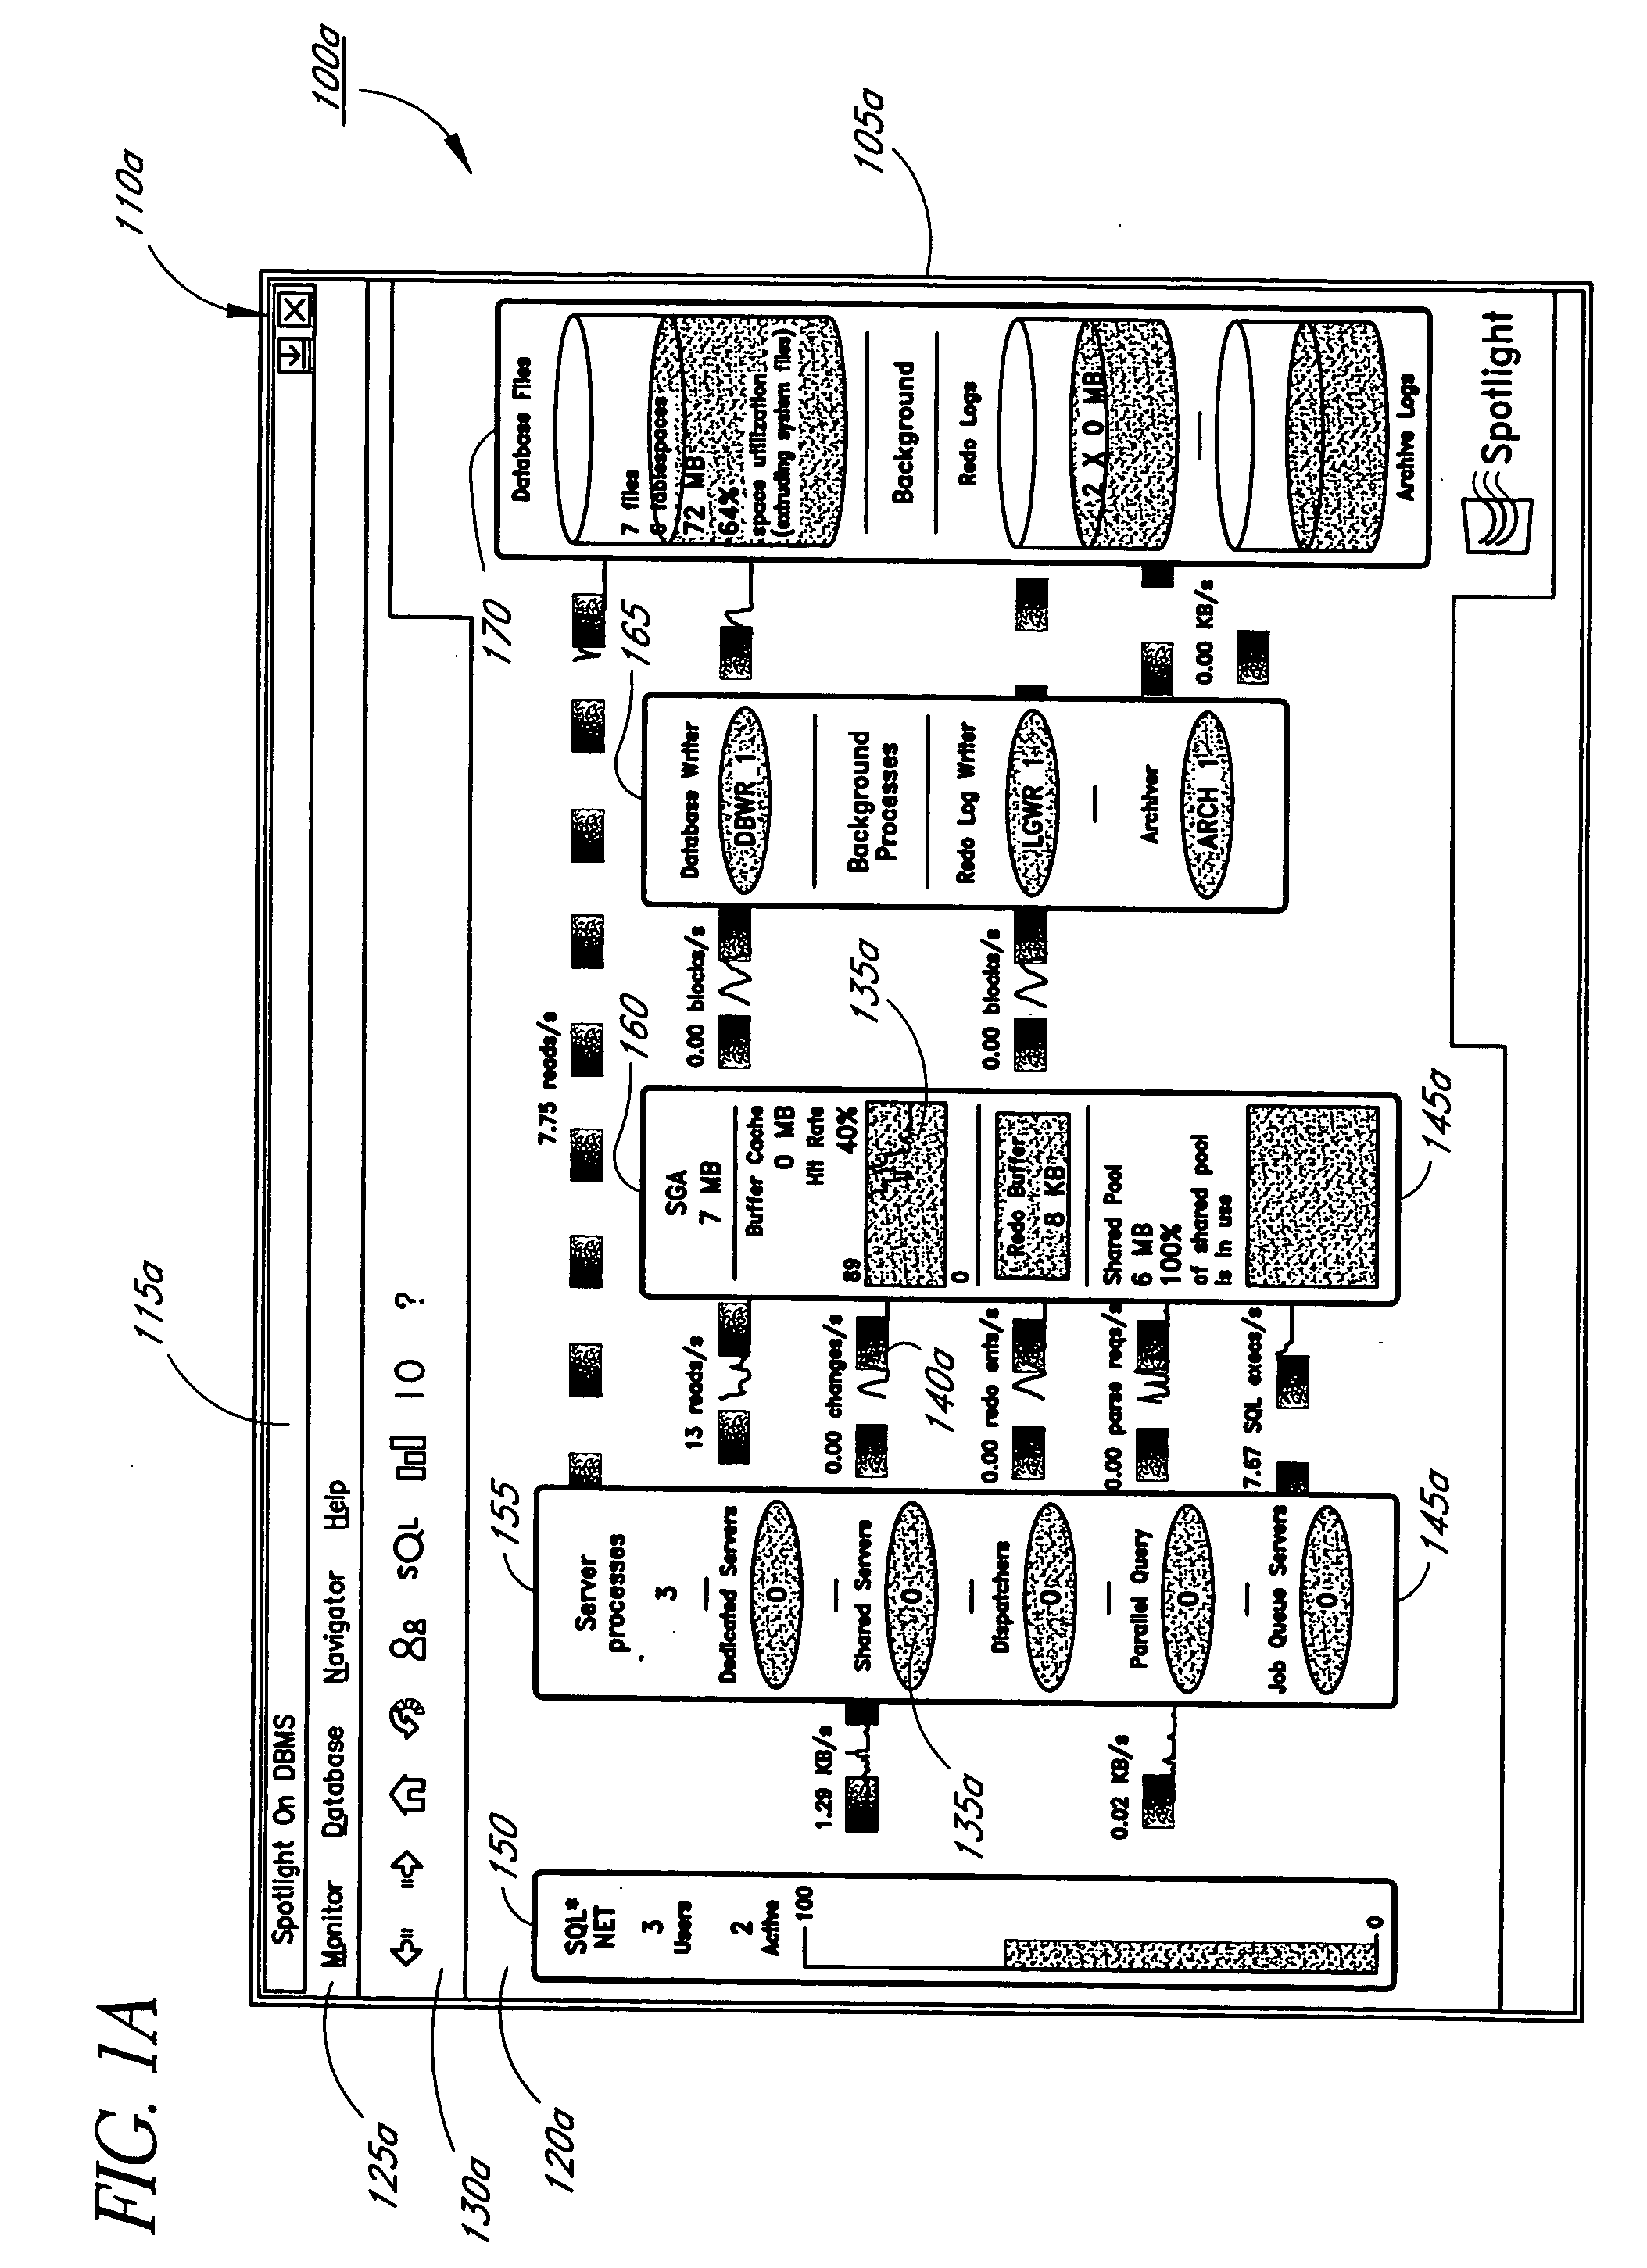 Systems and methods for monitoring a computing environment